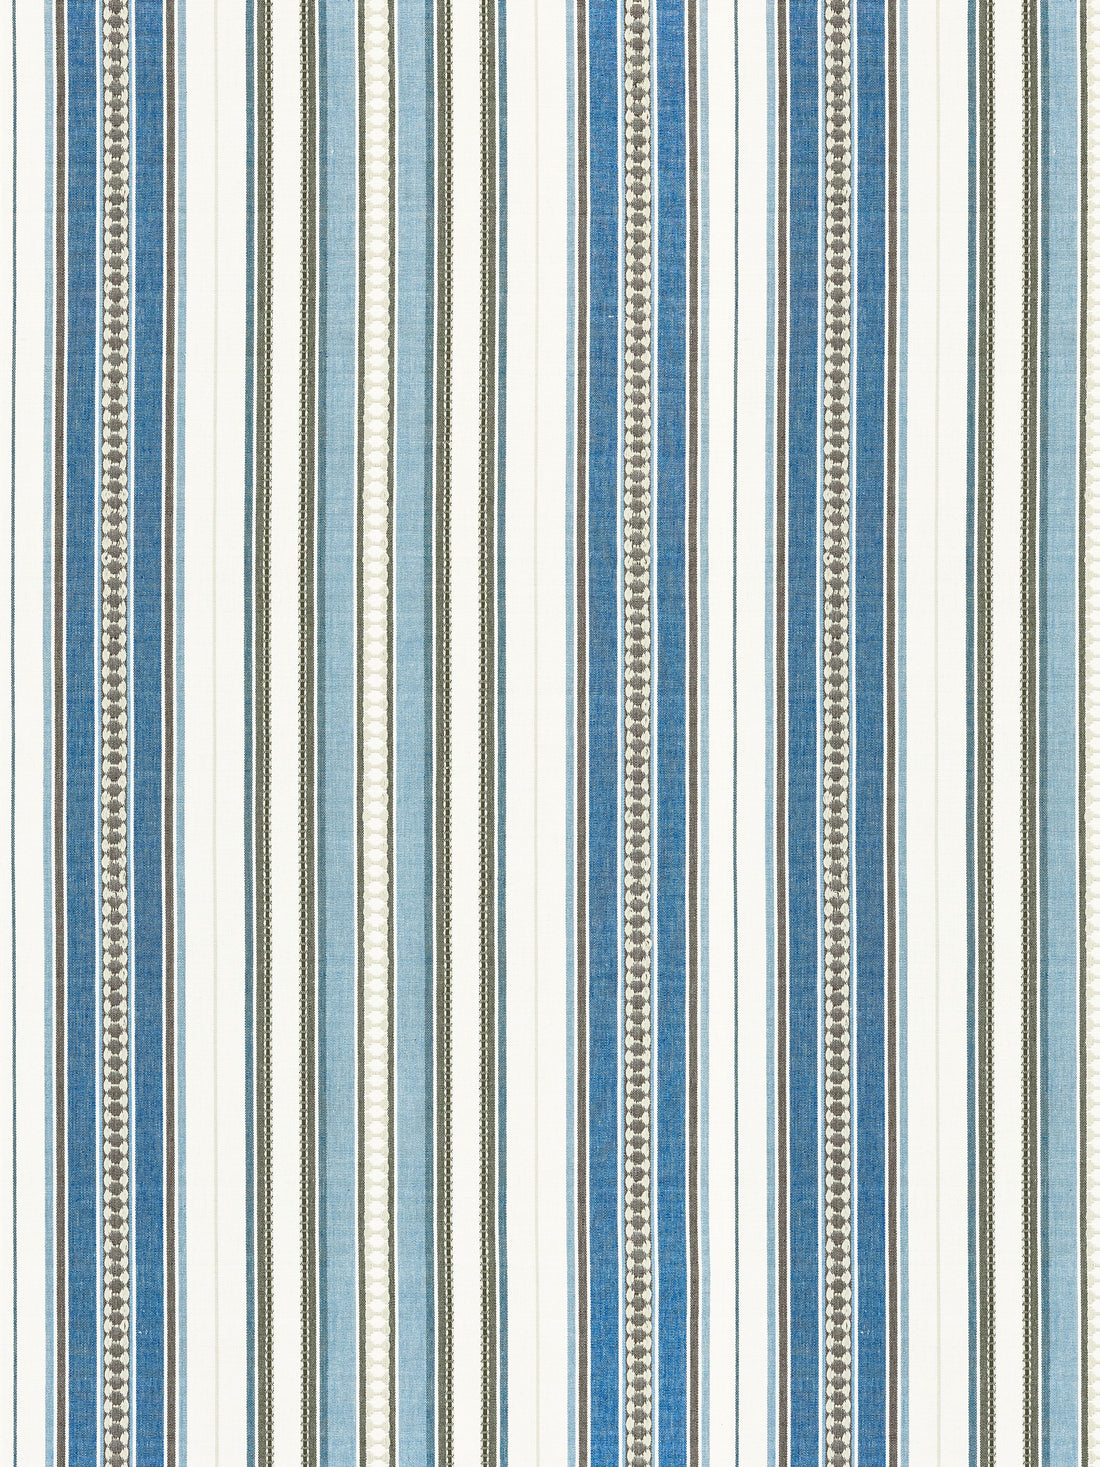 Nile Stripe fabric in blue jay color - pattern number SC 000227253 - by Scalamandre in the Scalamandre Fabrics Book 1 collection